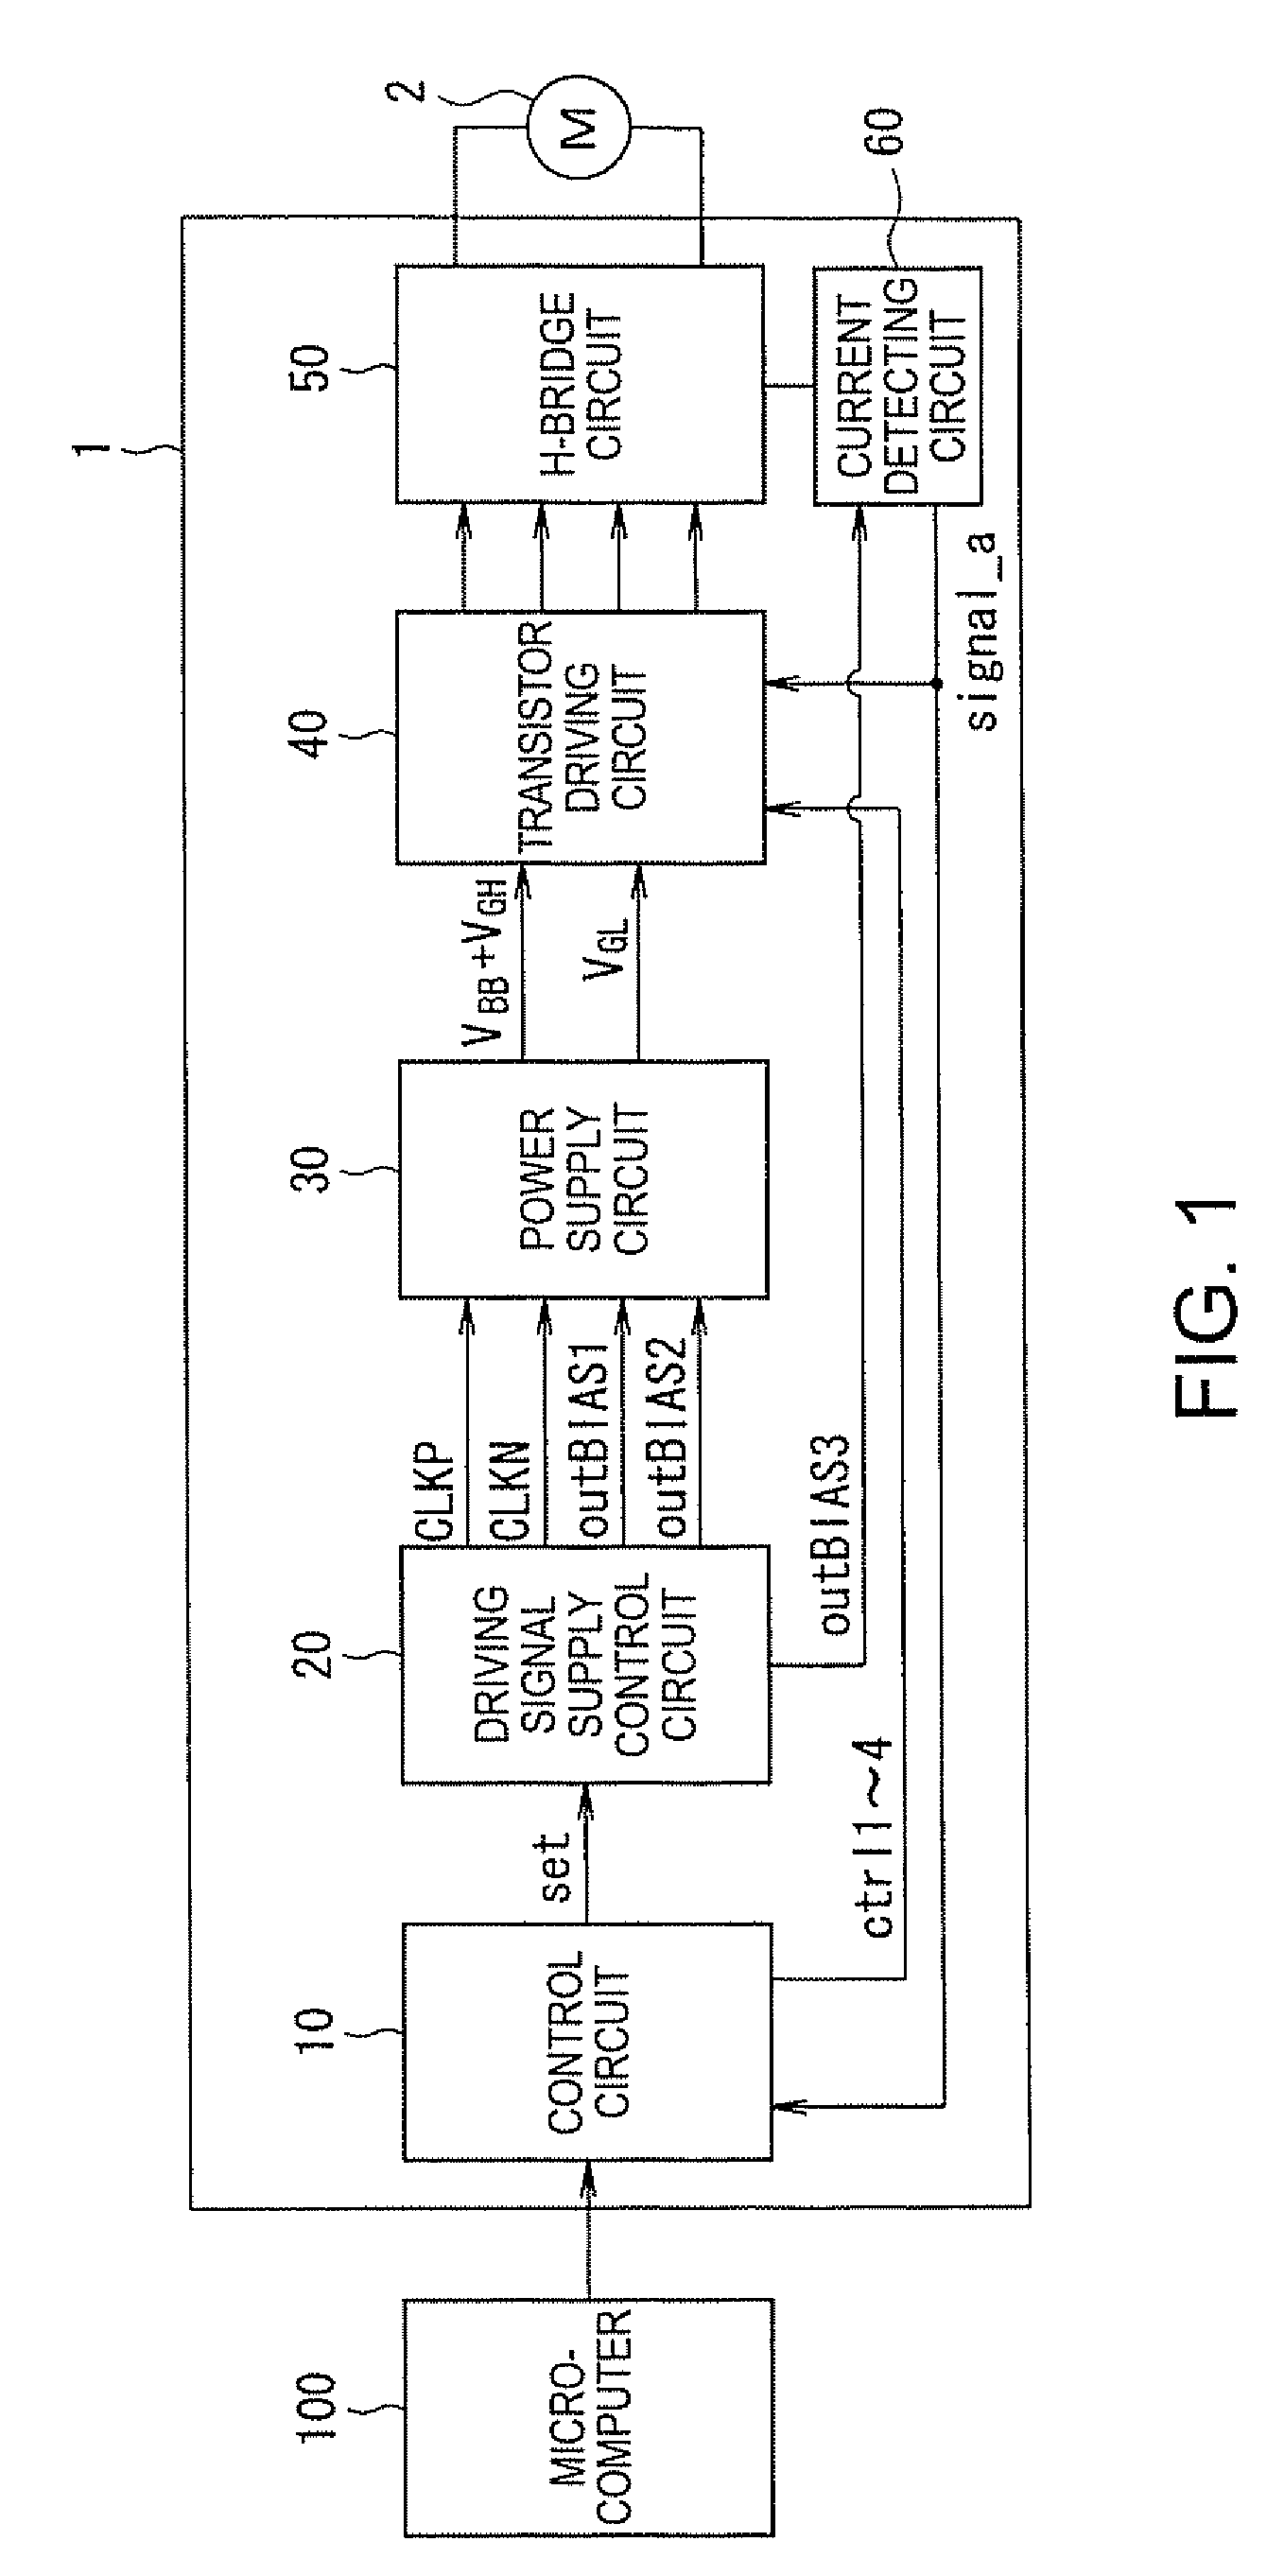 Semiconductor device for controlling supply of driving signals